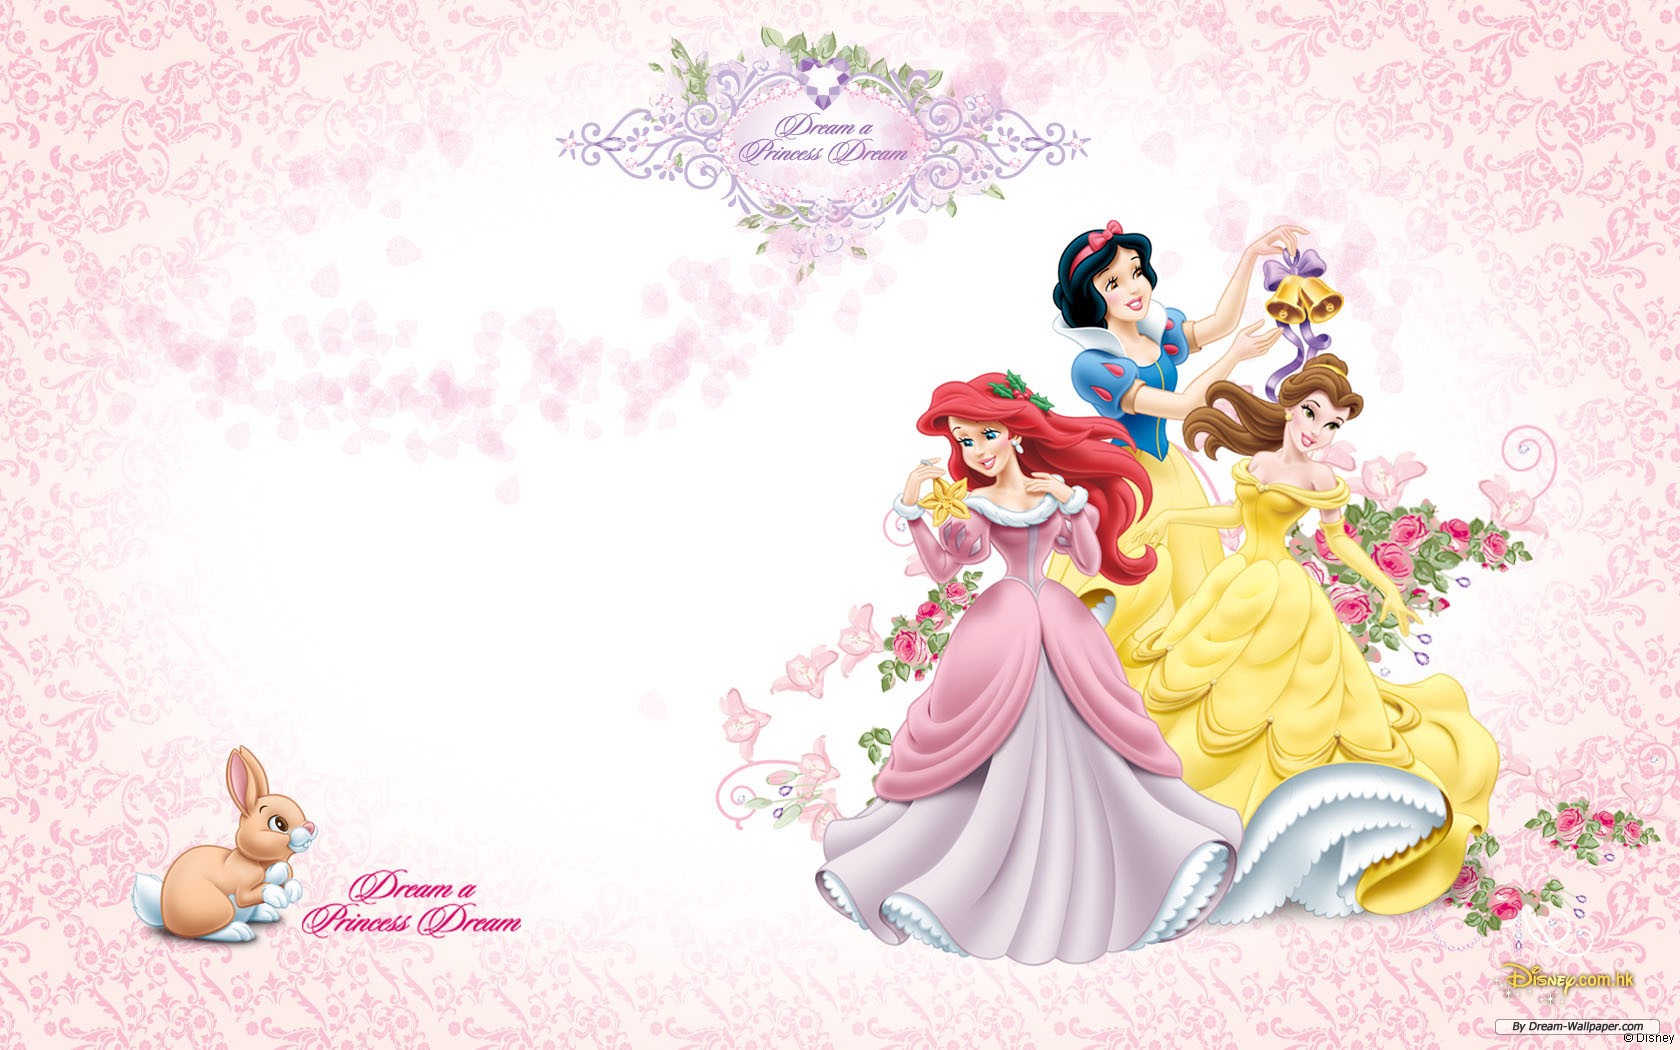 Collection of Disney Princess Wallpaper on HDWallpapers